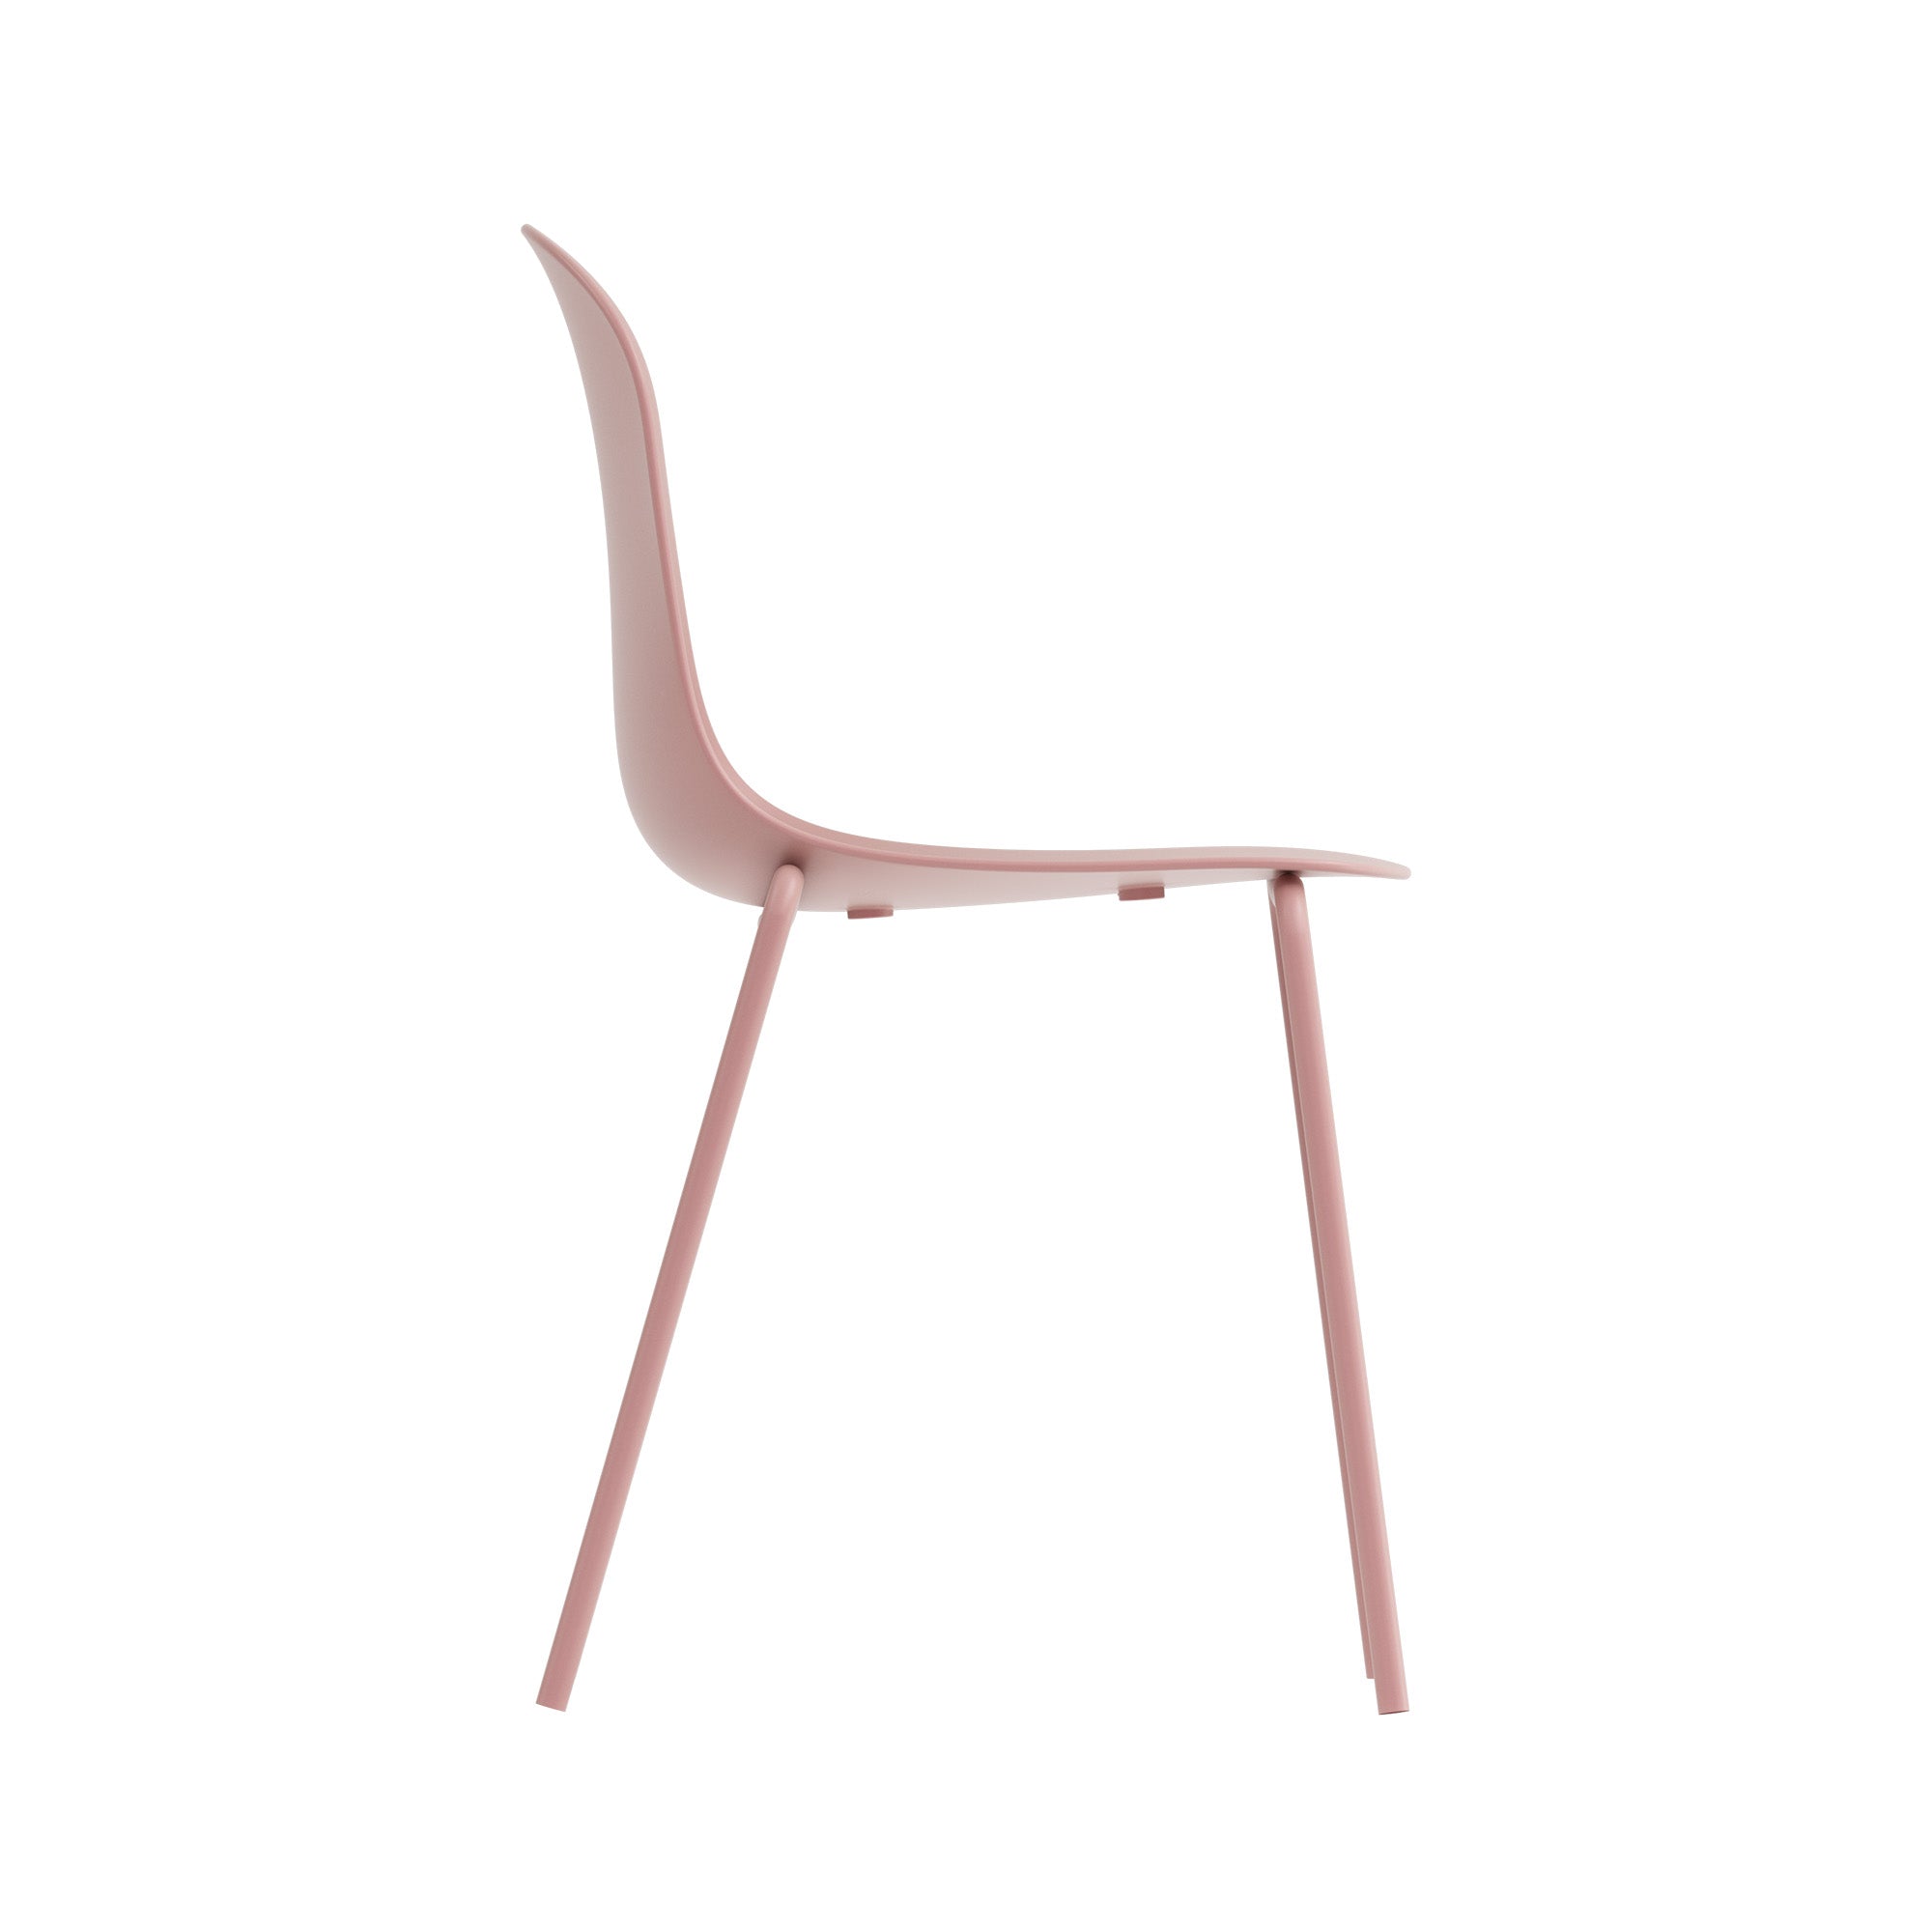 Serena Stackable Chair with Steel Frame - Dusty Pink - Set of 4